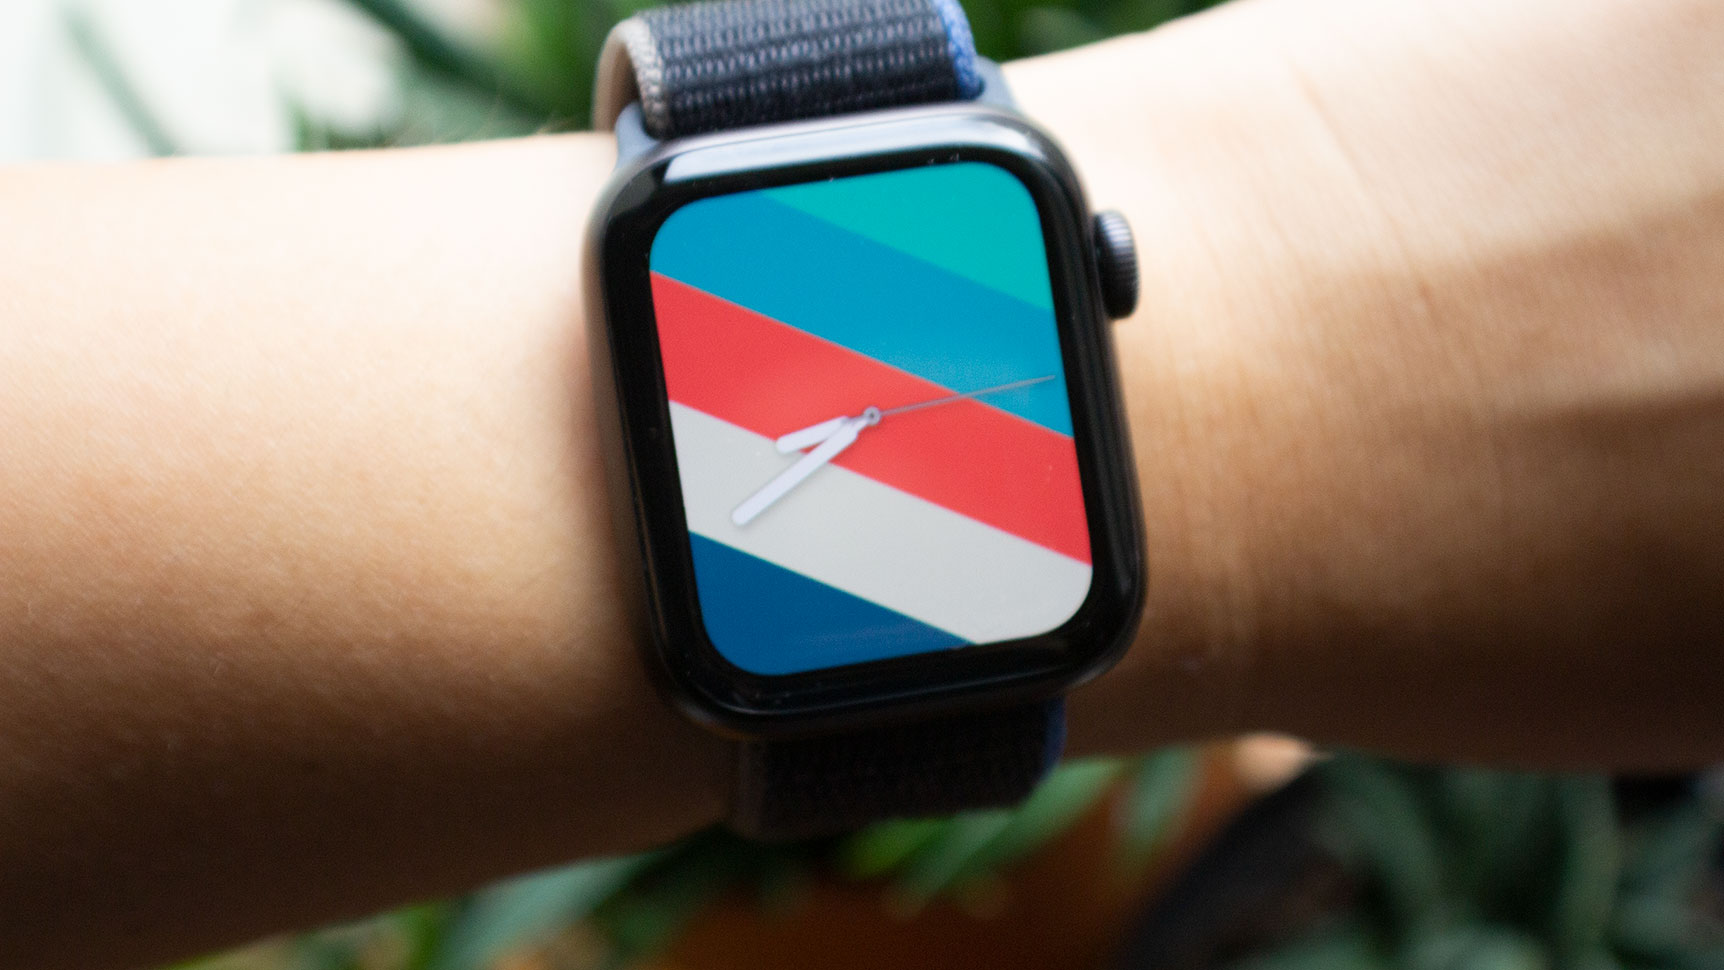 I dig the new Stripes watch face even though I usually prefer complications. (Photo: Victoria Song/Gizmodo)